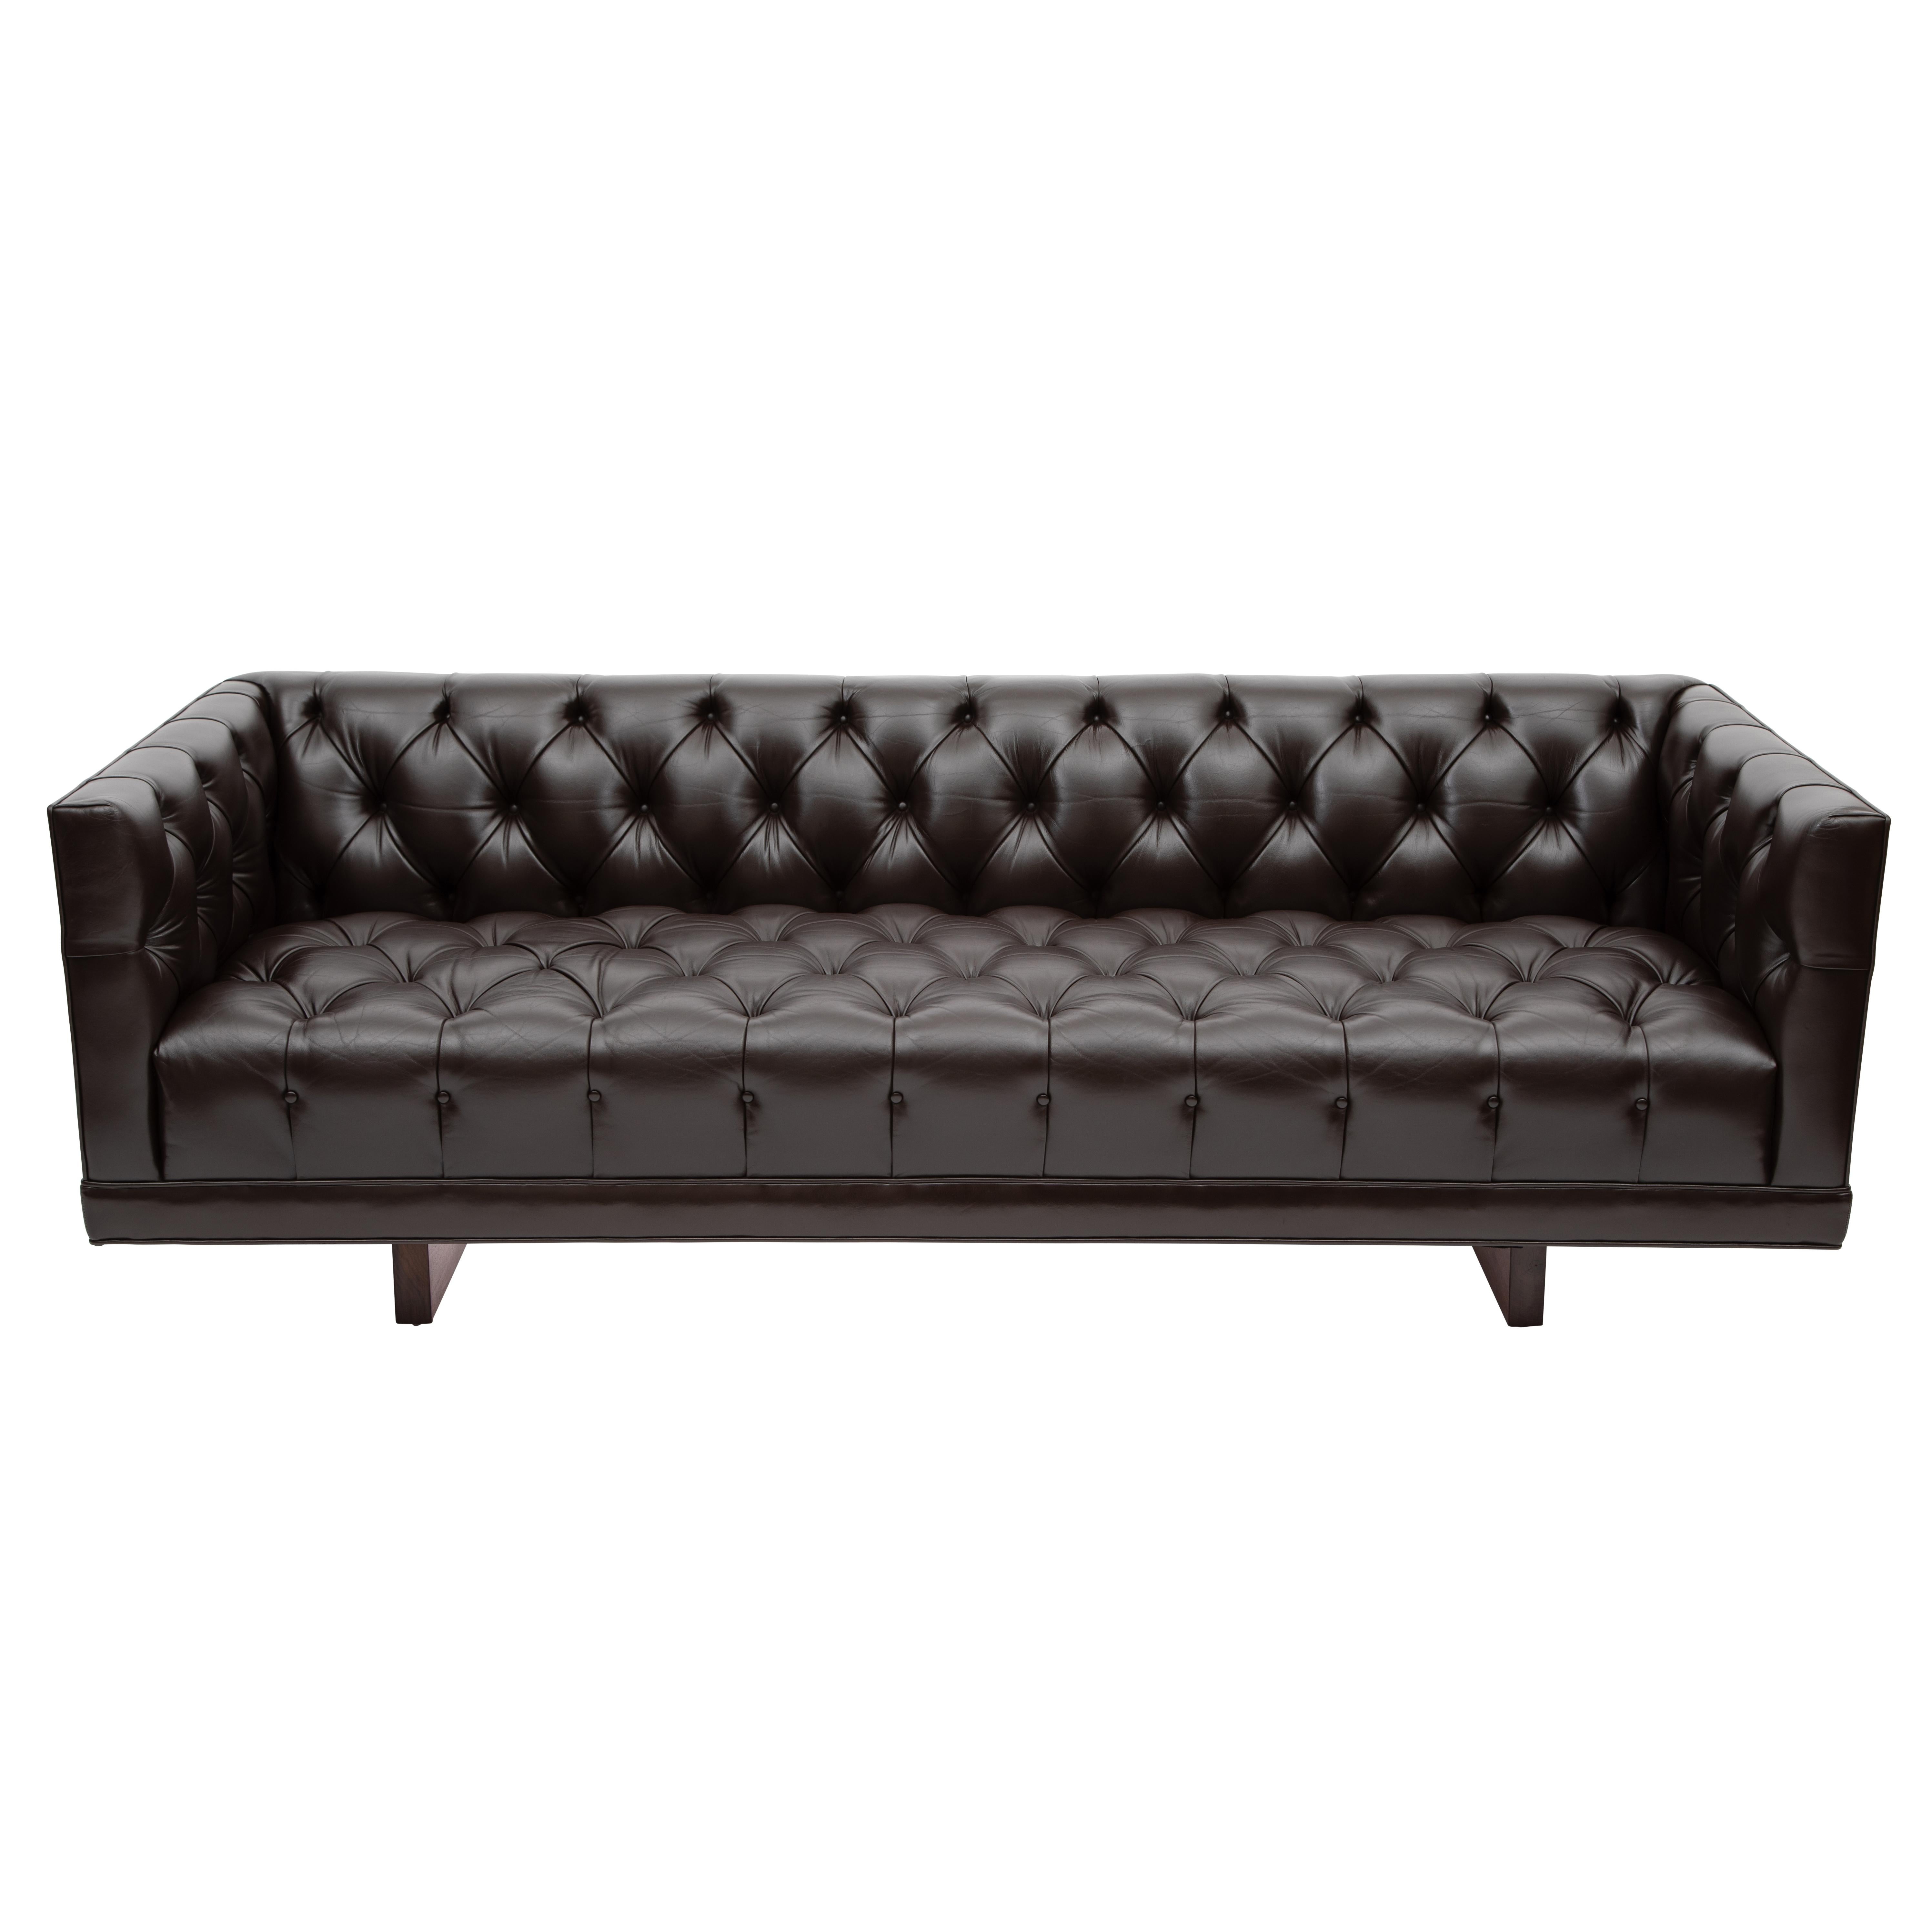 Ward Bennett Button-Tufted Leather Sofa for Lehigh Furniture, circa 1960s For Sale